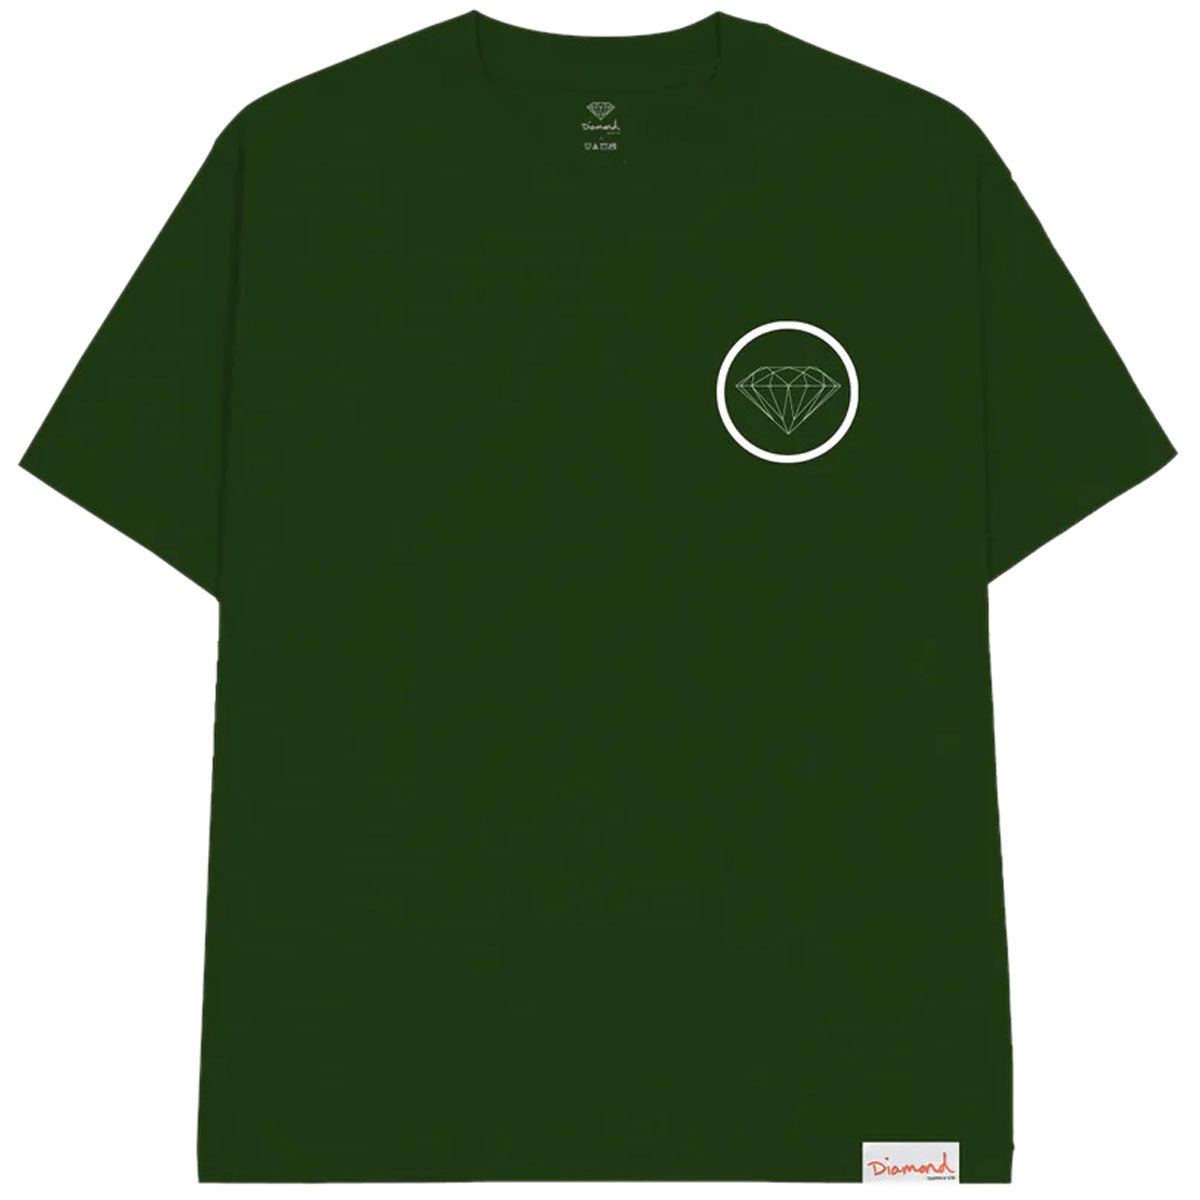 Diamond Supply Co. Brilliant Circle T-Shirt - Forest Green image 1